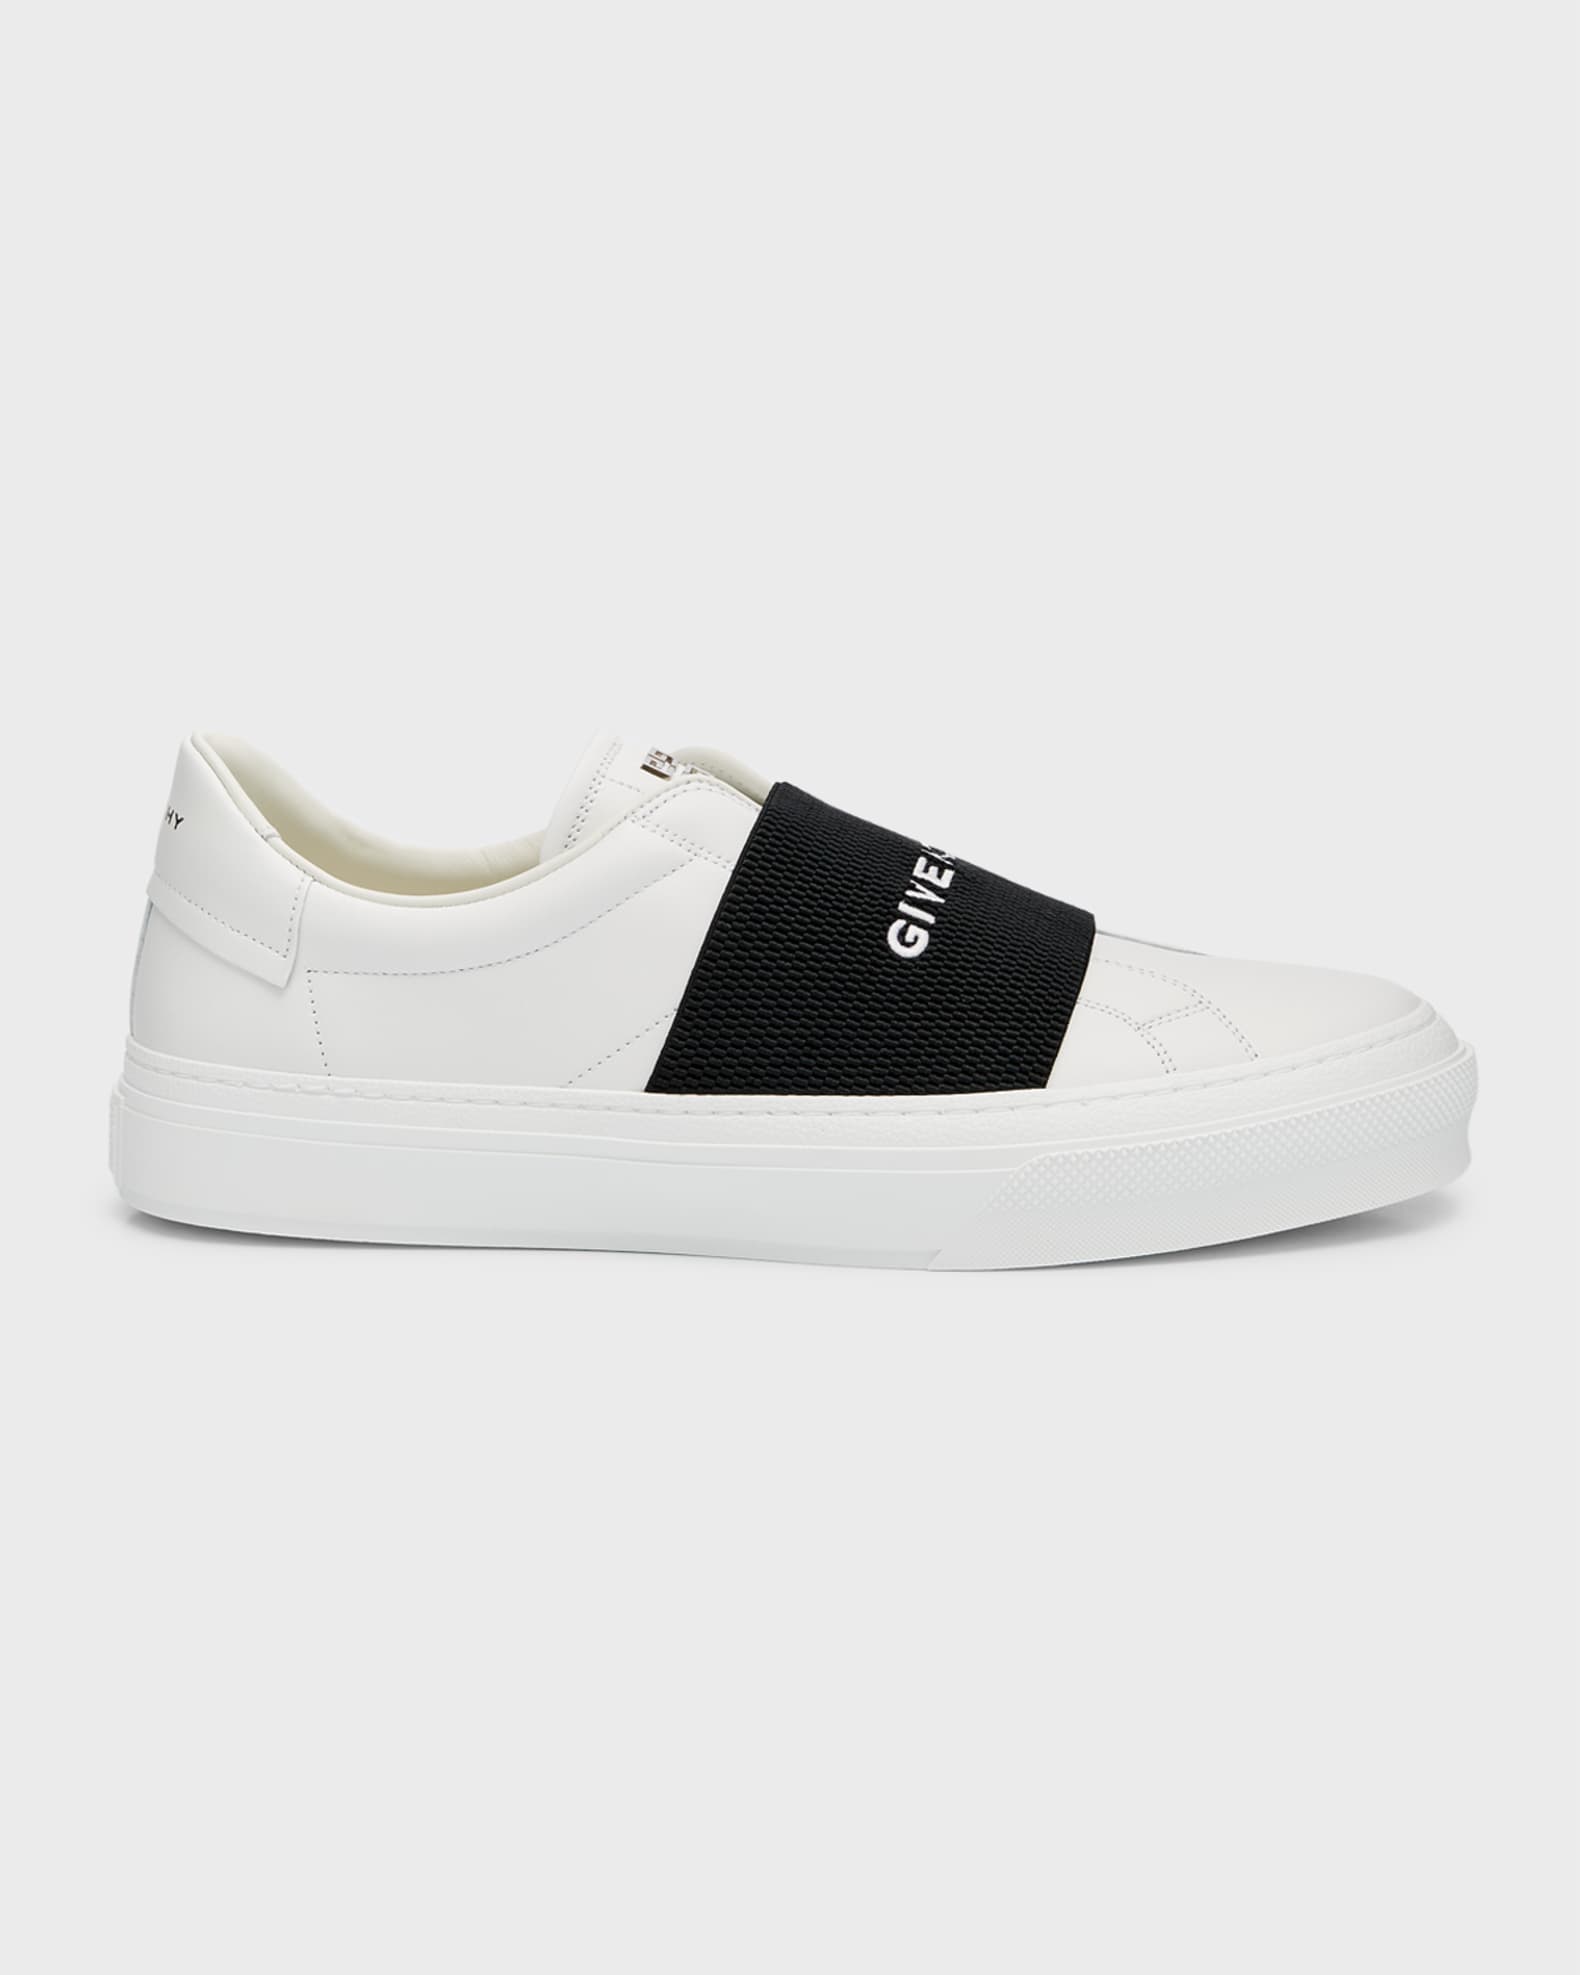 Givenchy Men's Logo Leather Slip-On Sneakers | Neiman Marcus